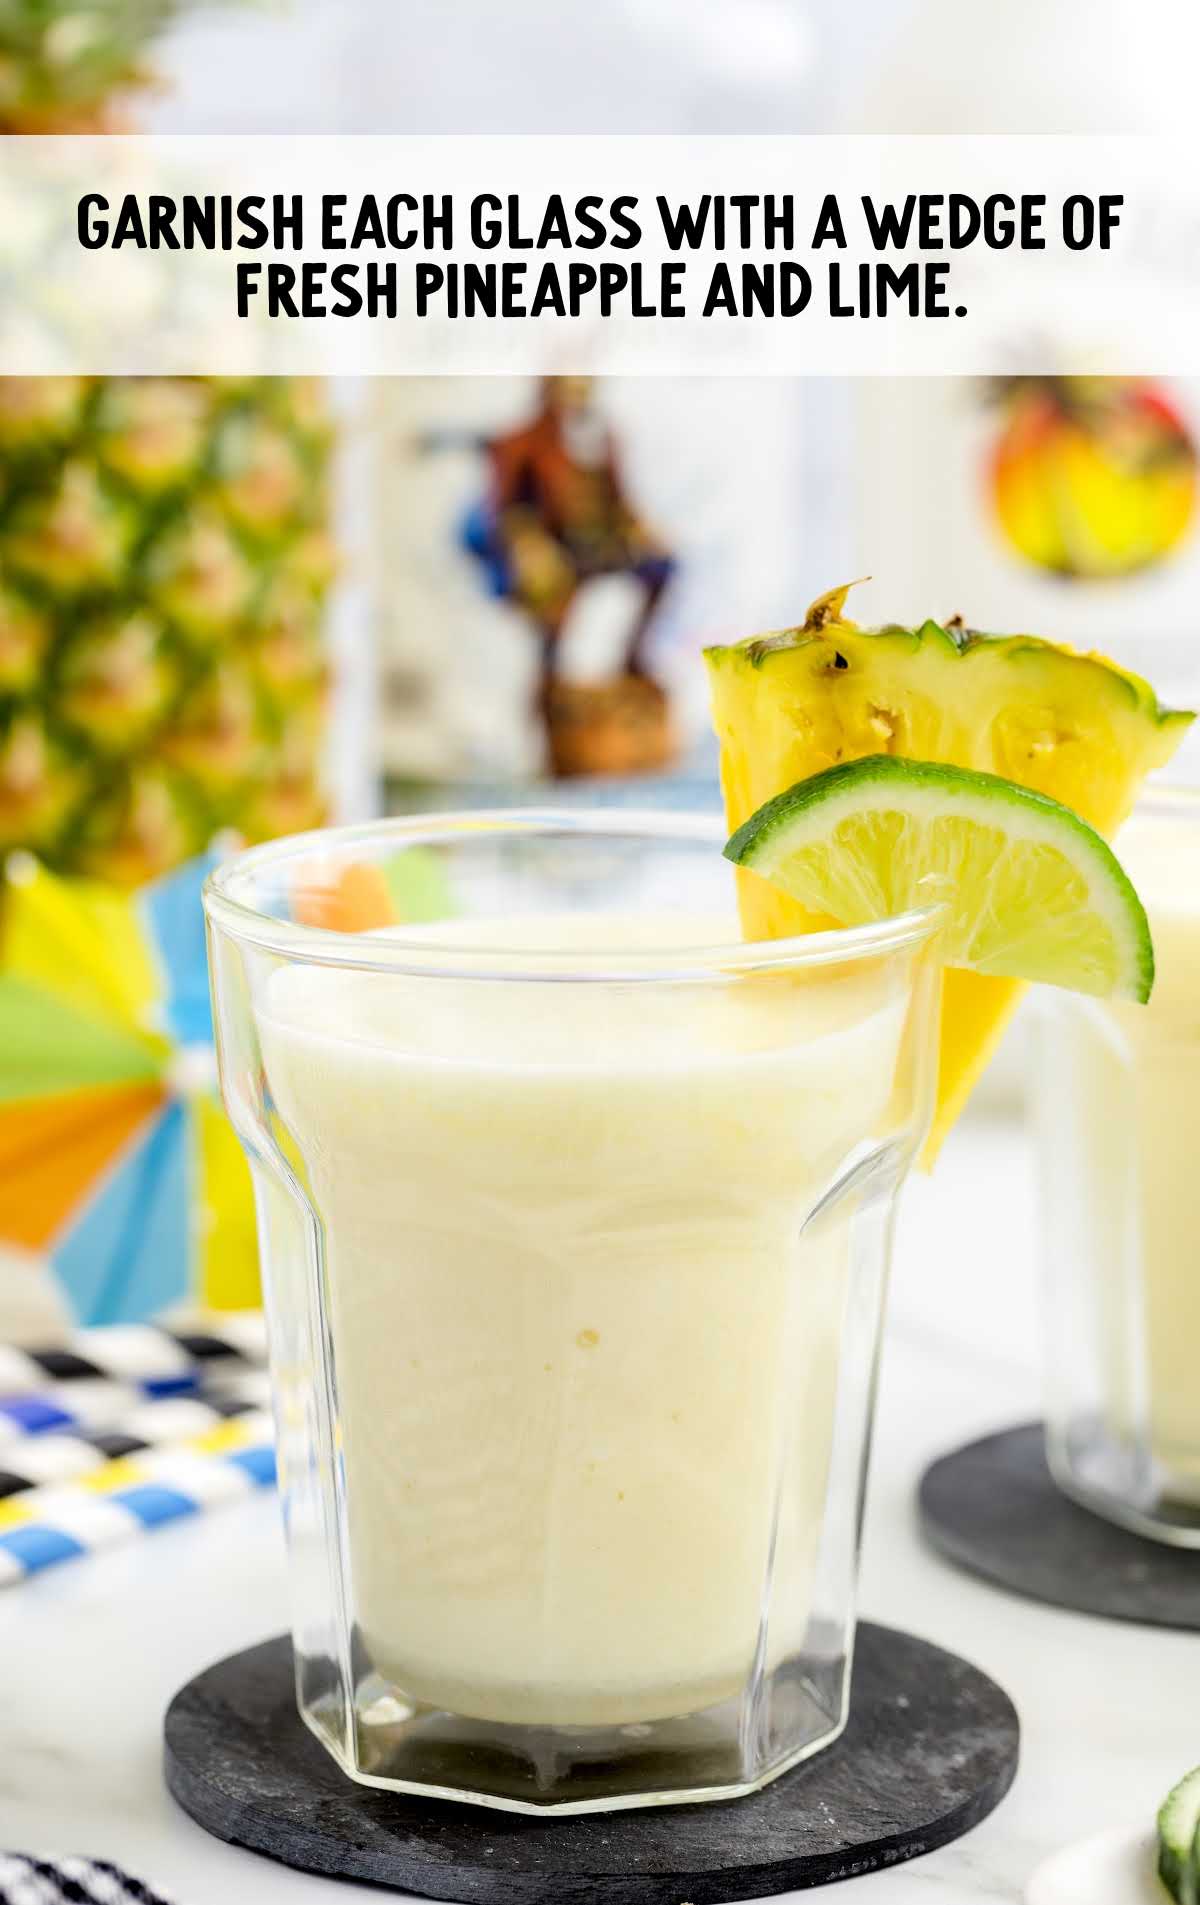 Pineapple Cooler garnished with pineapple and lime wedge